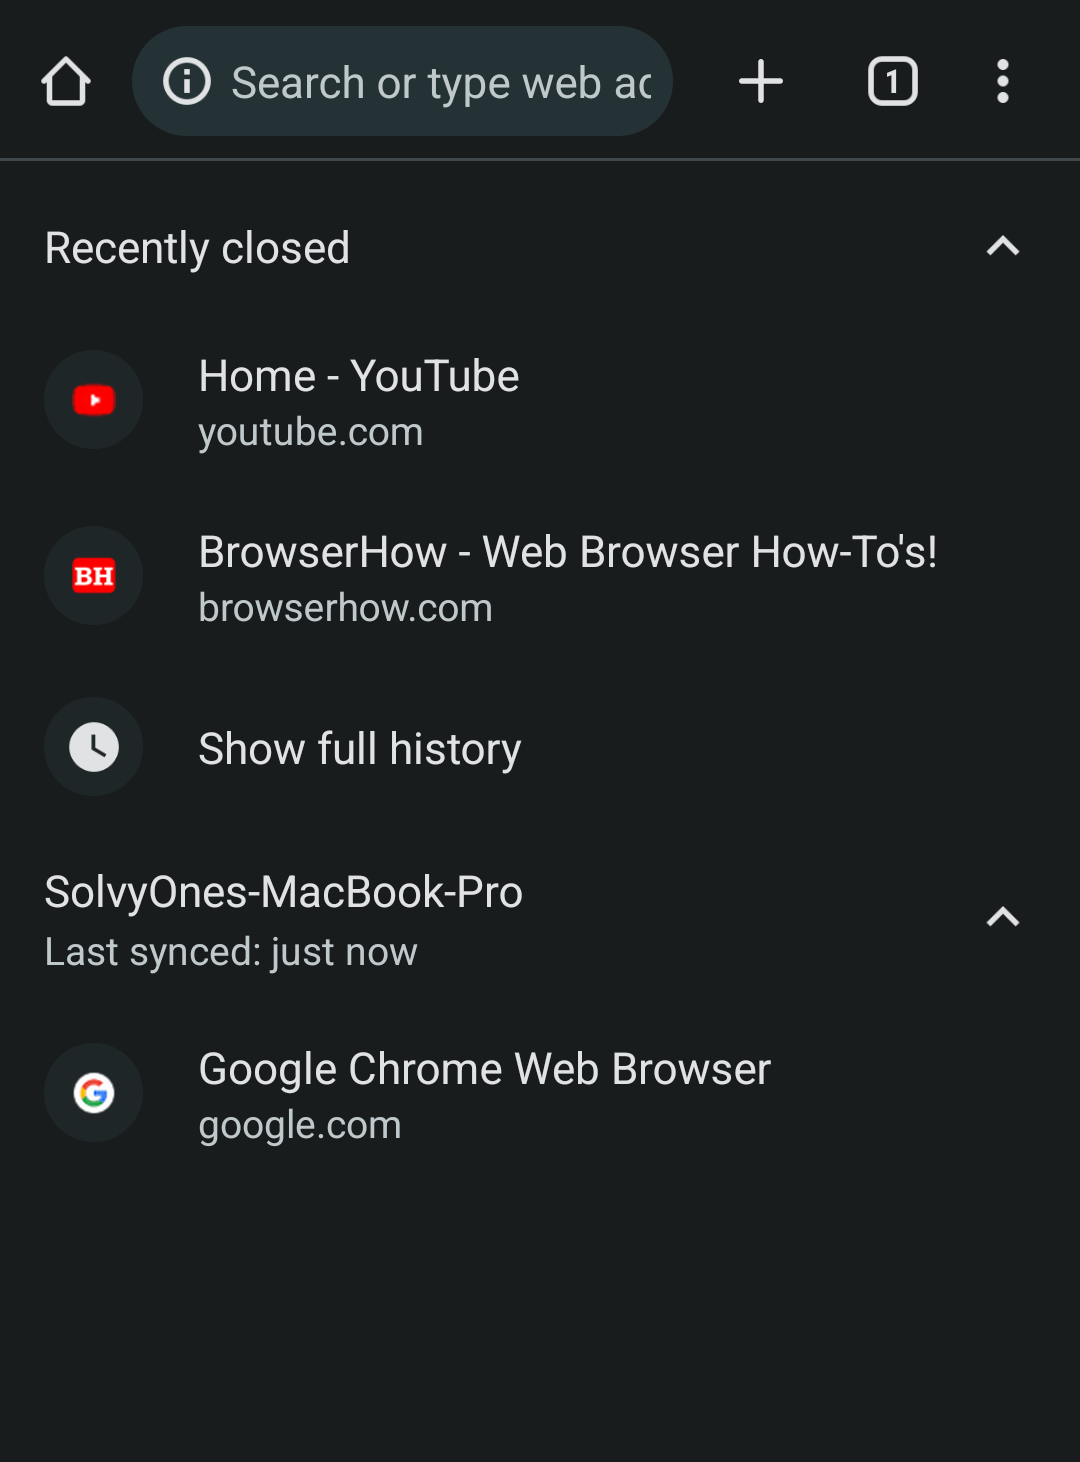 Recently closed tabs in Chrome for Android